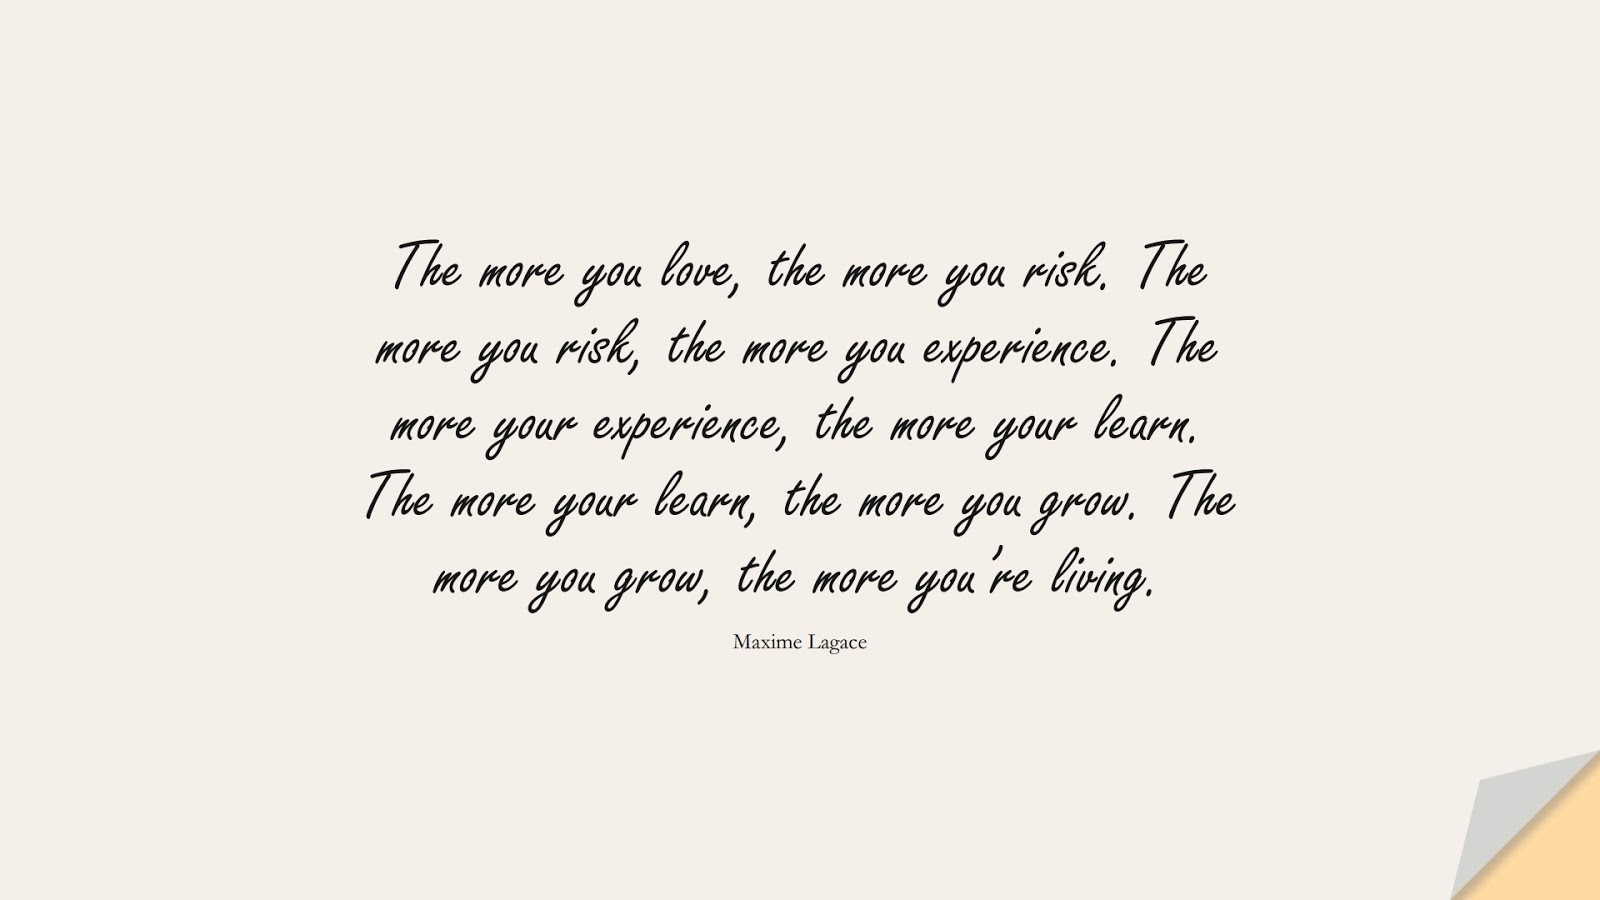 The more you love, the more you risk. The more you risk, the more you experience. The more your experience, the more your learn. The more your learn, the more you grow. The more you grow, the more you’re living. (Maxime Lagace);  #ChangeQuotes